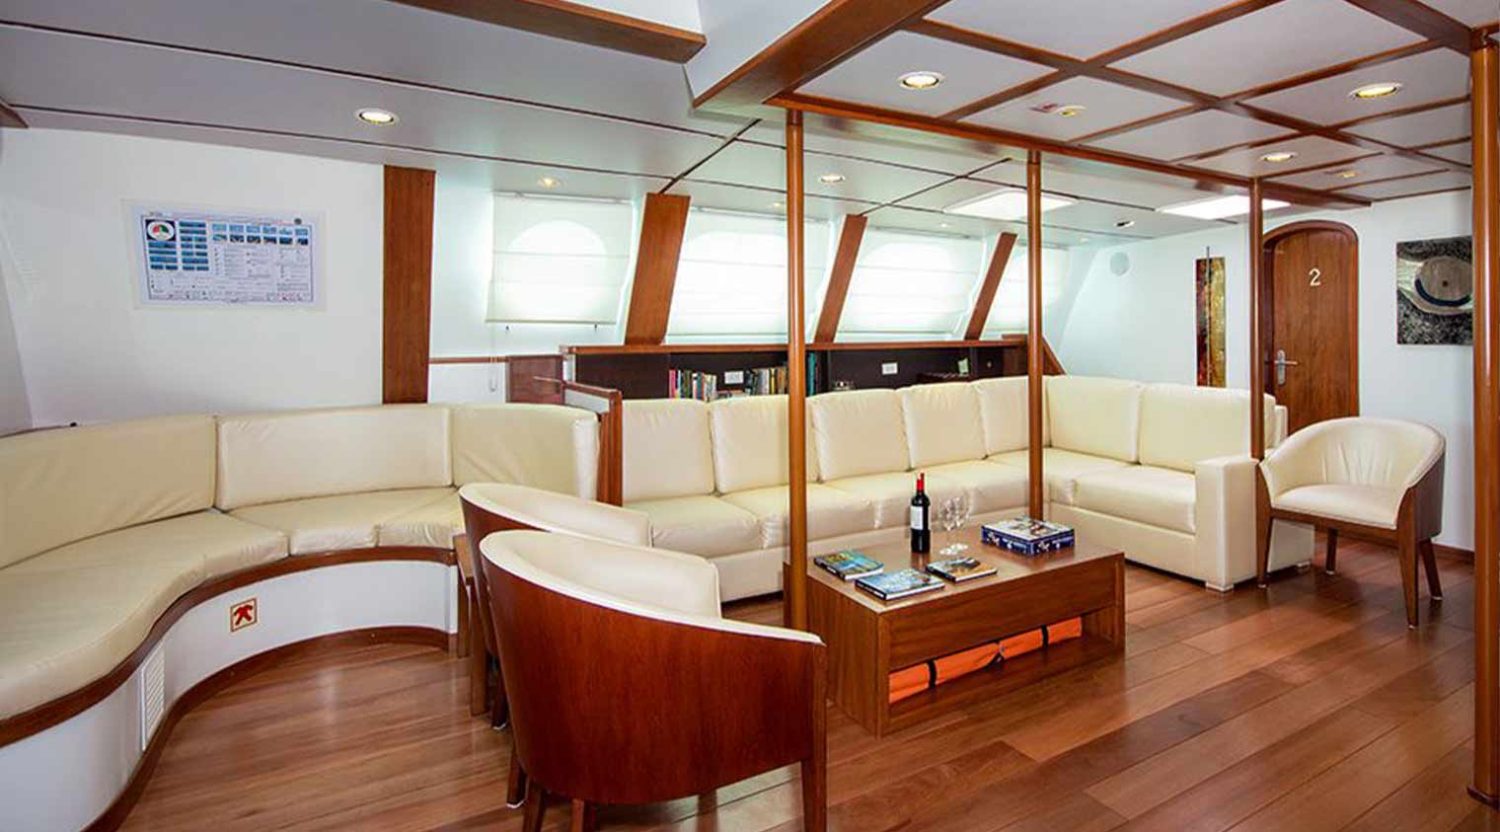 living room of nemo 3 yacht of galapagos islands